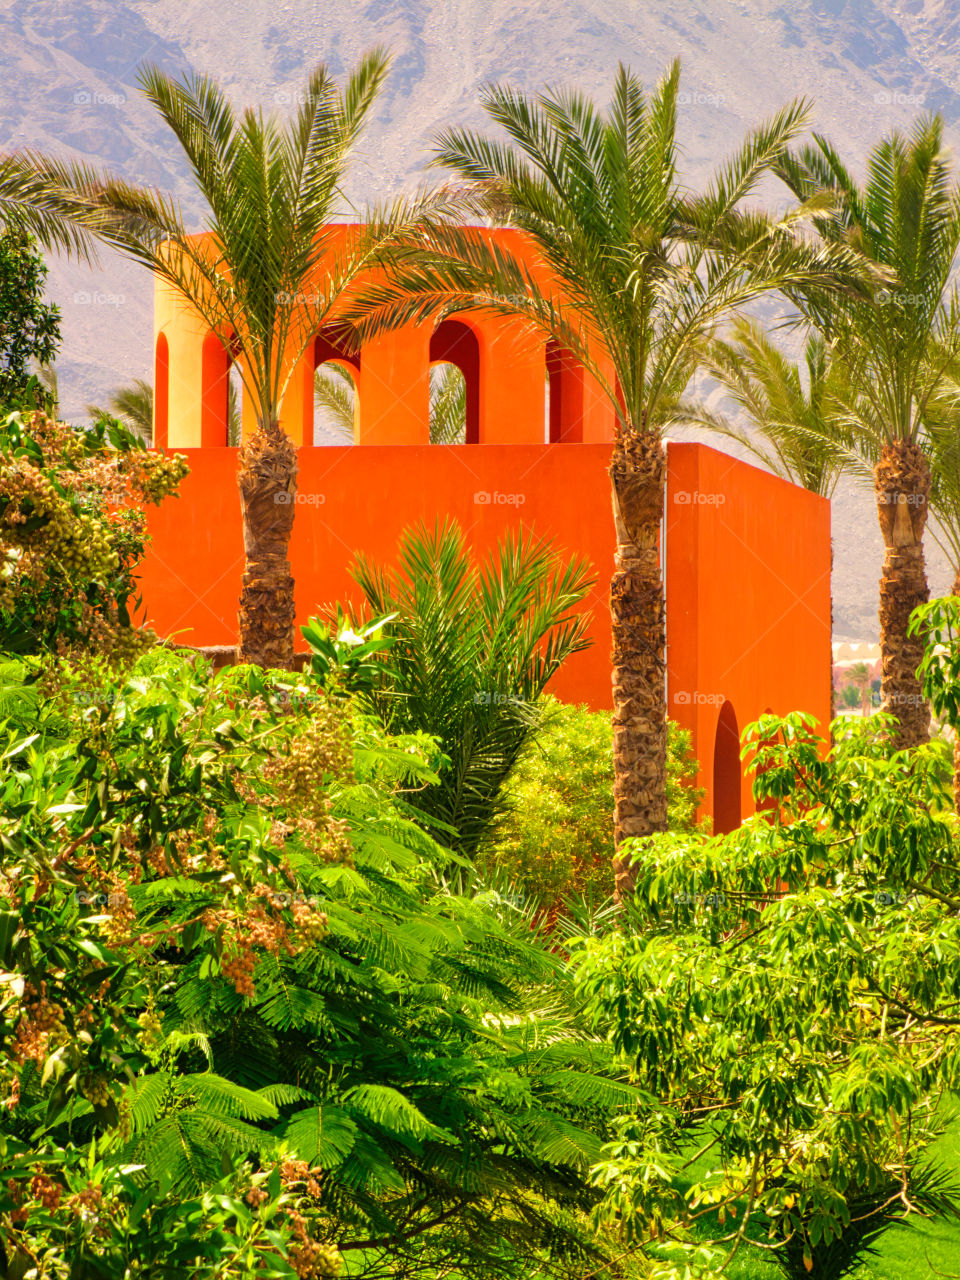 Orange colored villa surrounded by lushness of green garden.